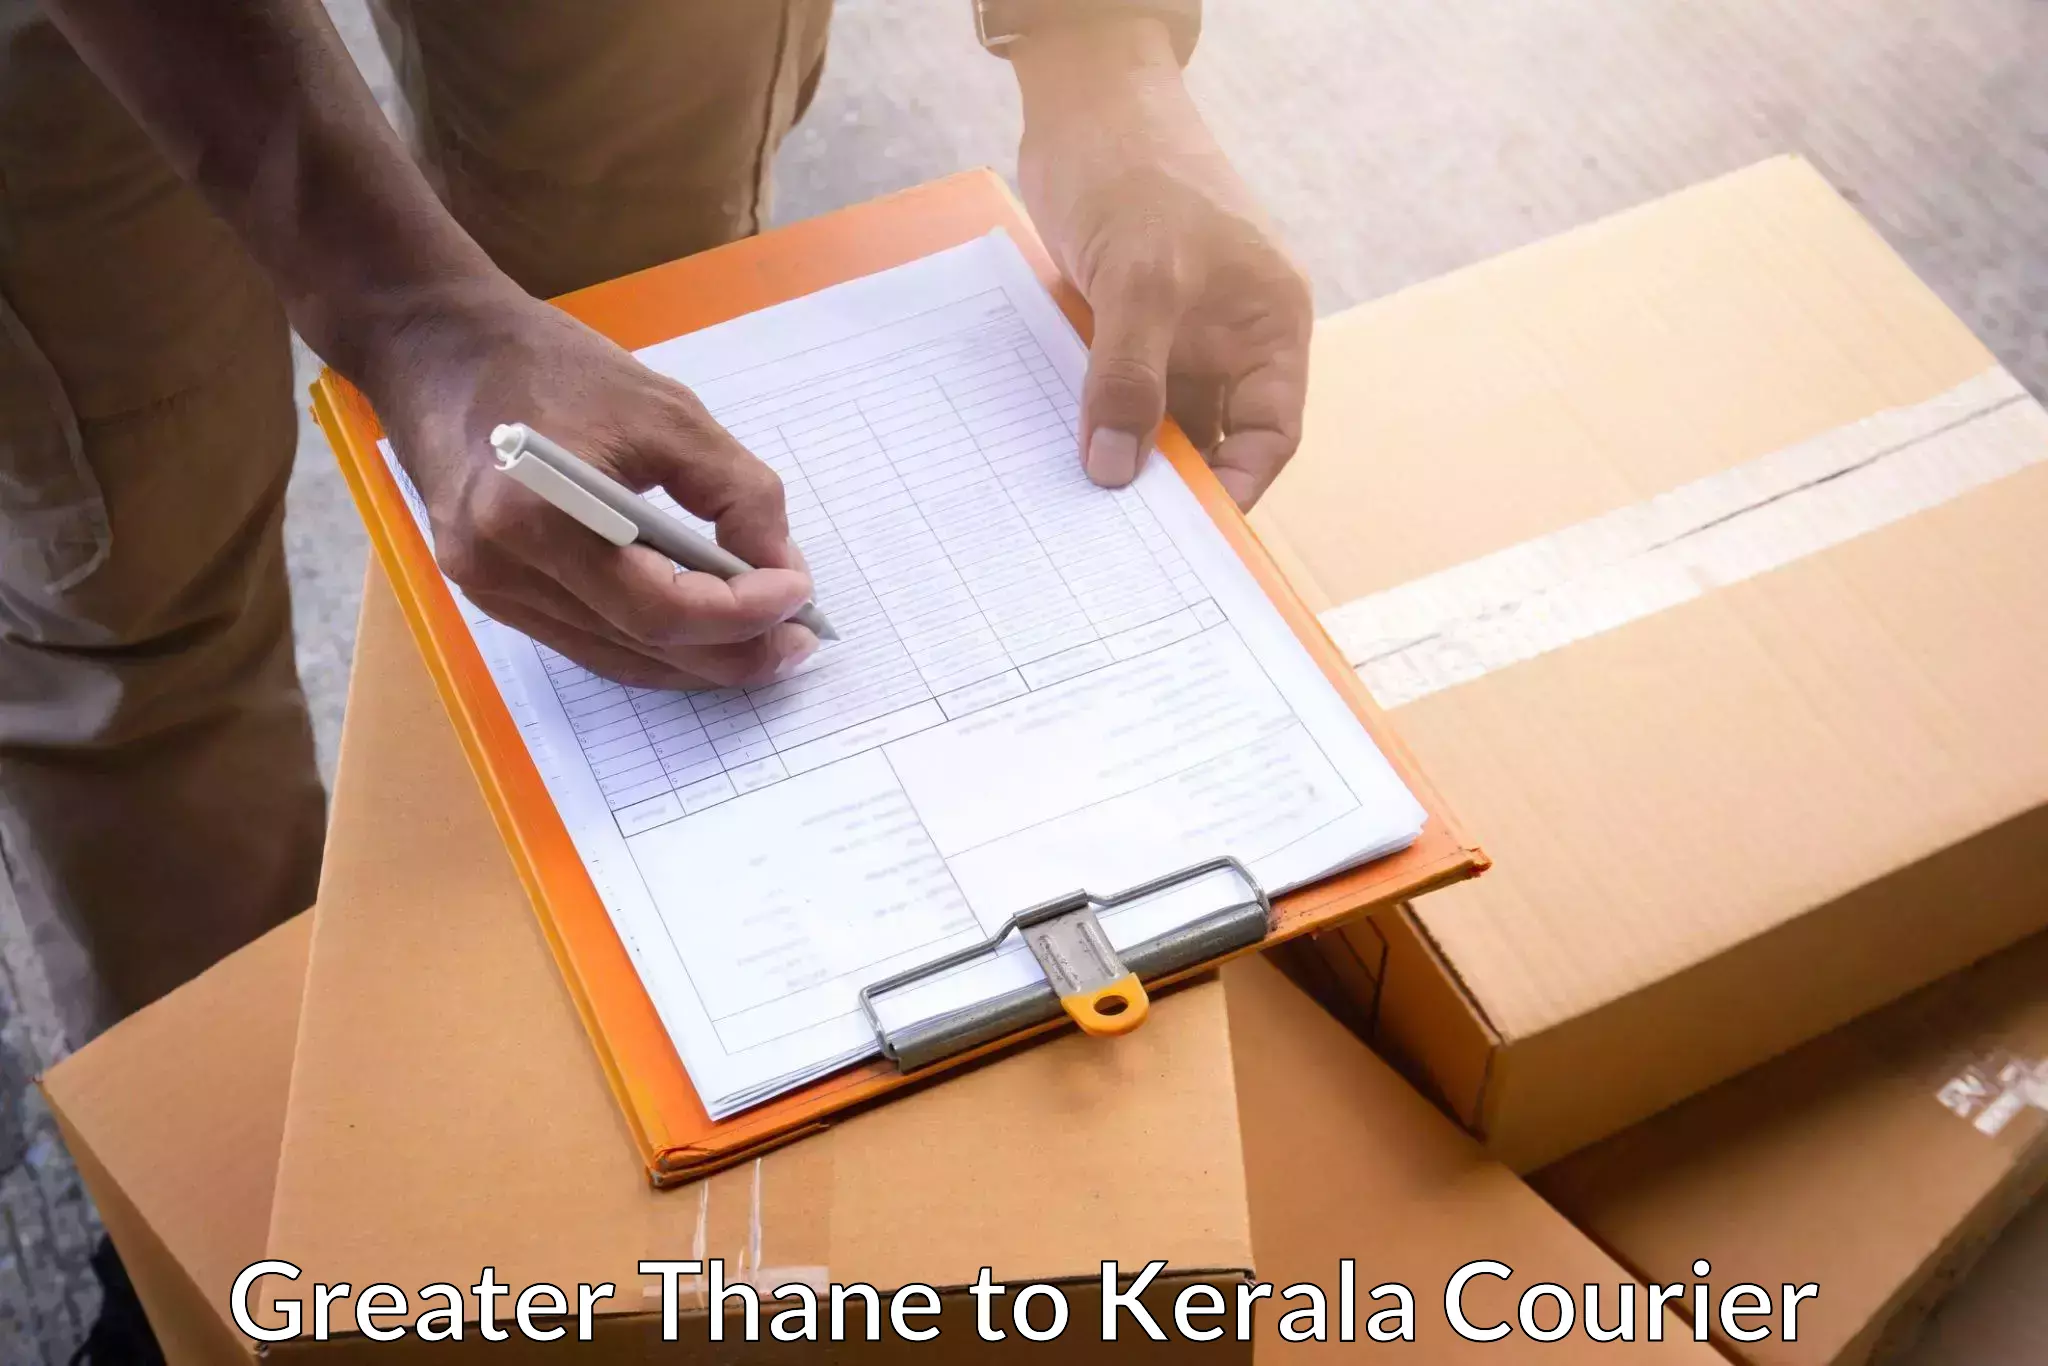 Courier service partnerships Greater Thane to Kochi